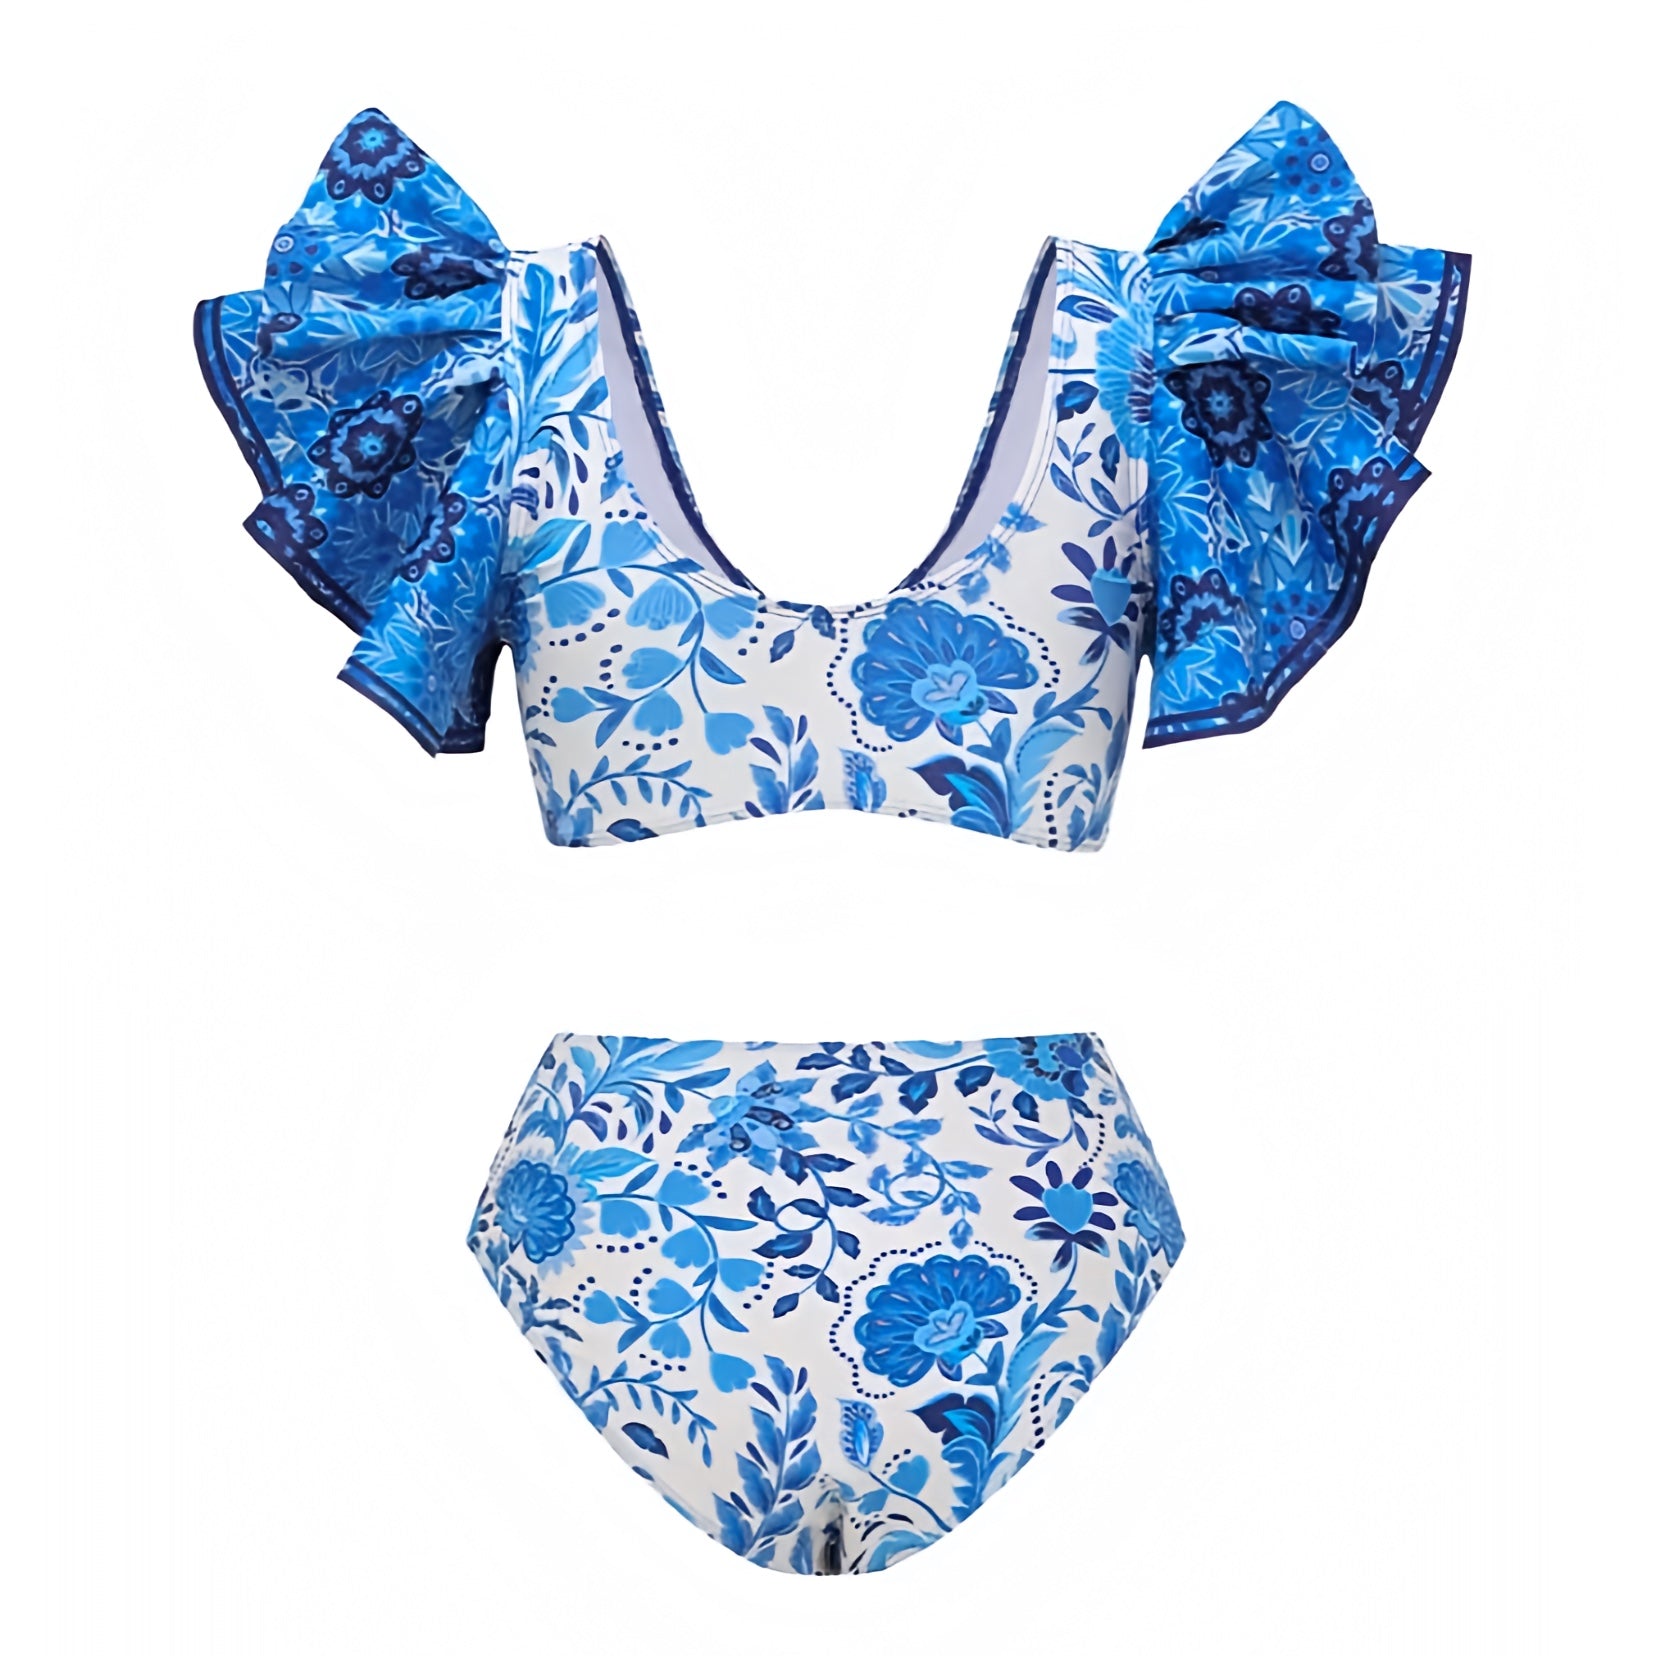 floral-print-light-blue-and-white-multi-color-flower-patterned-layered-ruffle-trim-bow-string-tie-short-puff-sleeve-scoop-neckline-underwire-push-up-cheeky-thong-2-piece-bikini-set-swimsuit-top-bottoms-swimwear-bathing-suit-women-ladies-teens-tweens-chic-trendy-spring-2024-summer-elegant-feminine-preppy-style-girlie-cute-tropical-european-greece-vacation-beach-wear-coastal-granddaughter-mamma-mia-blackbough-frankies-kulakinis-altard-state-fillyboo-roller-rabbit-revolve-dupe